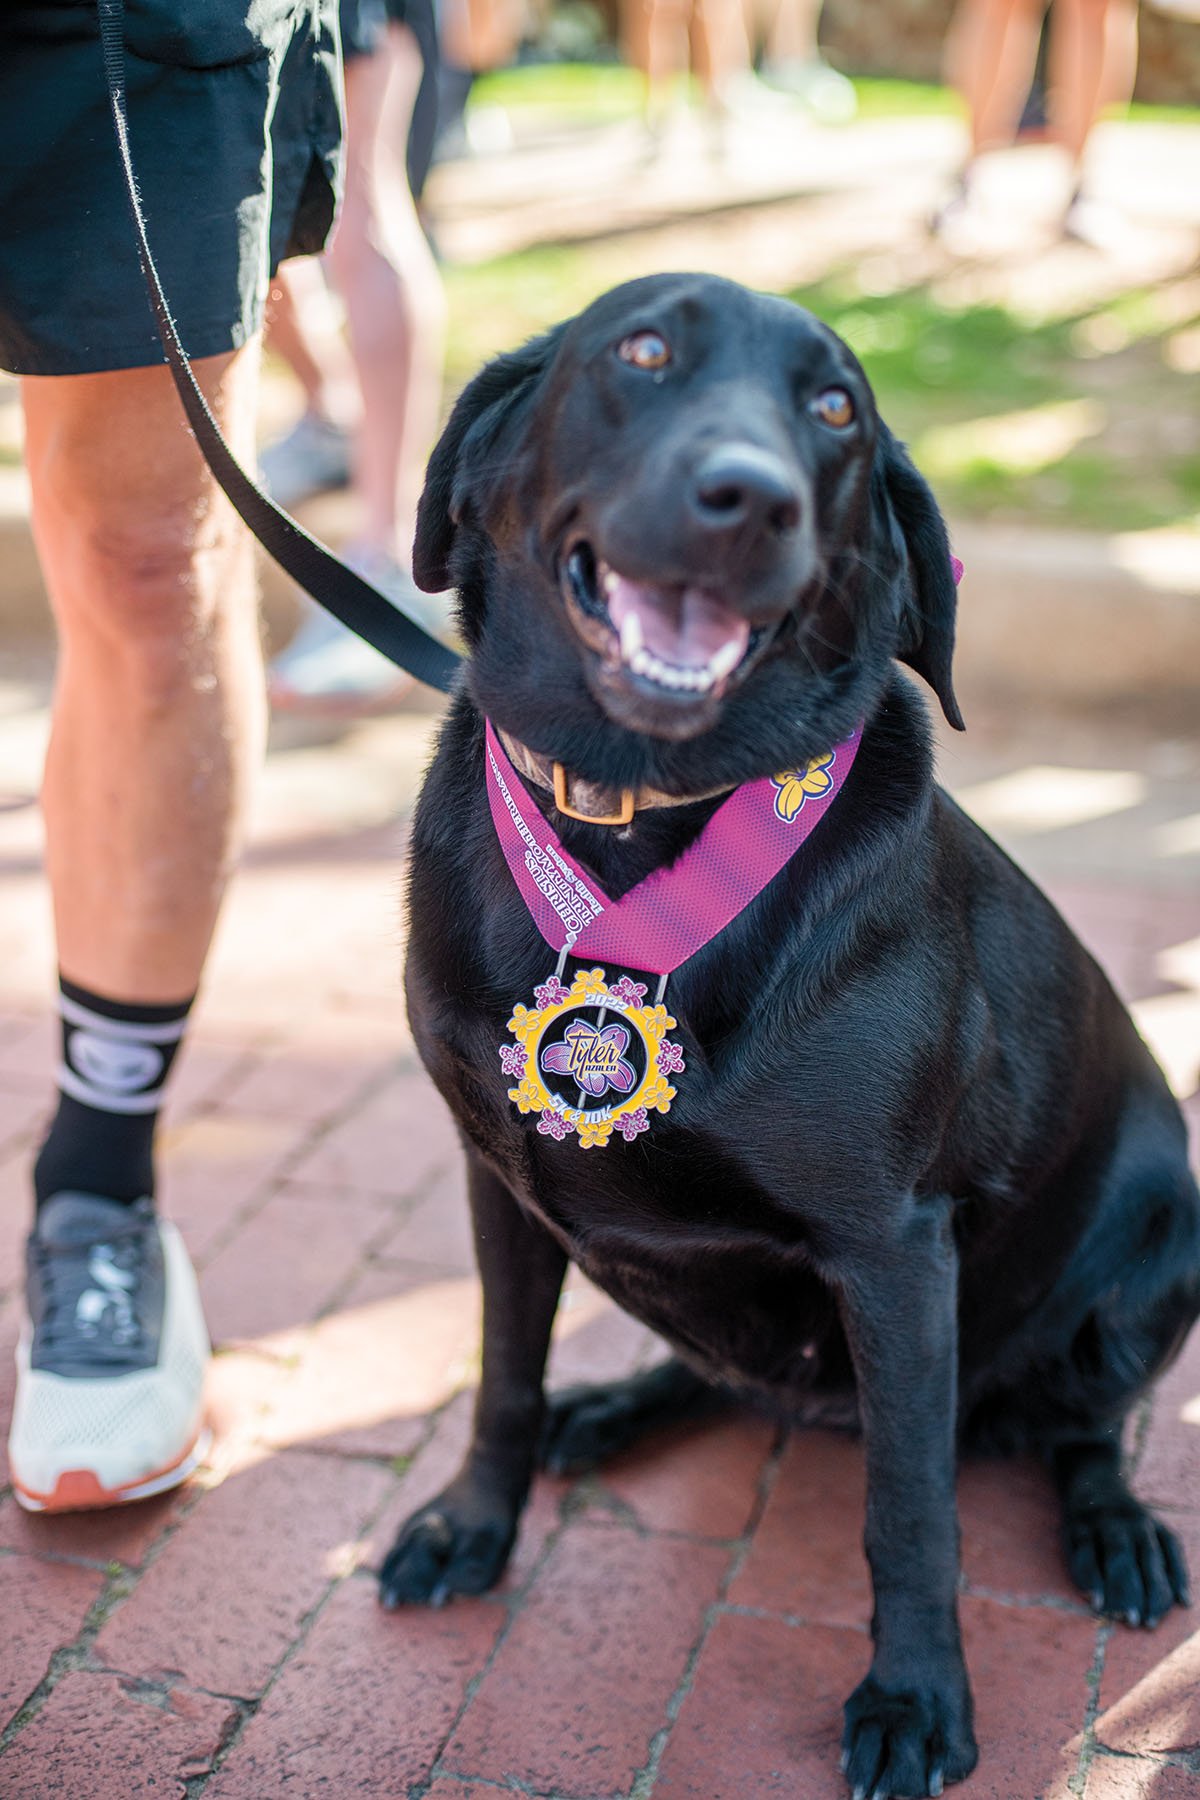 A black dog poses with a purple race medal